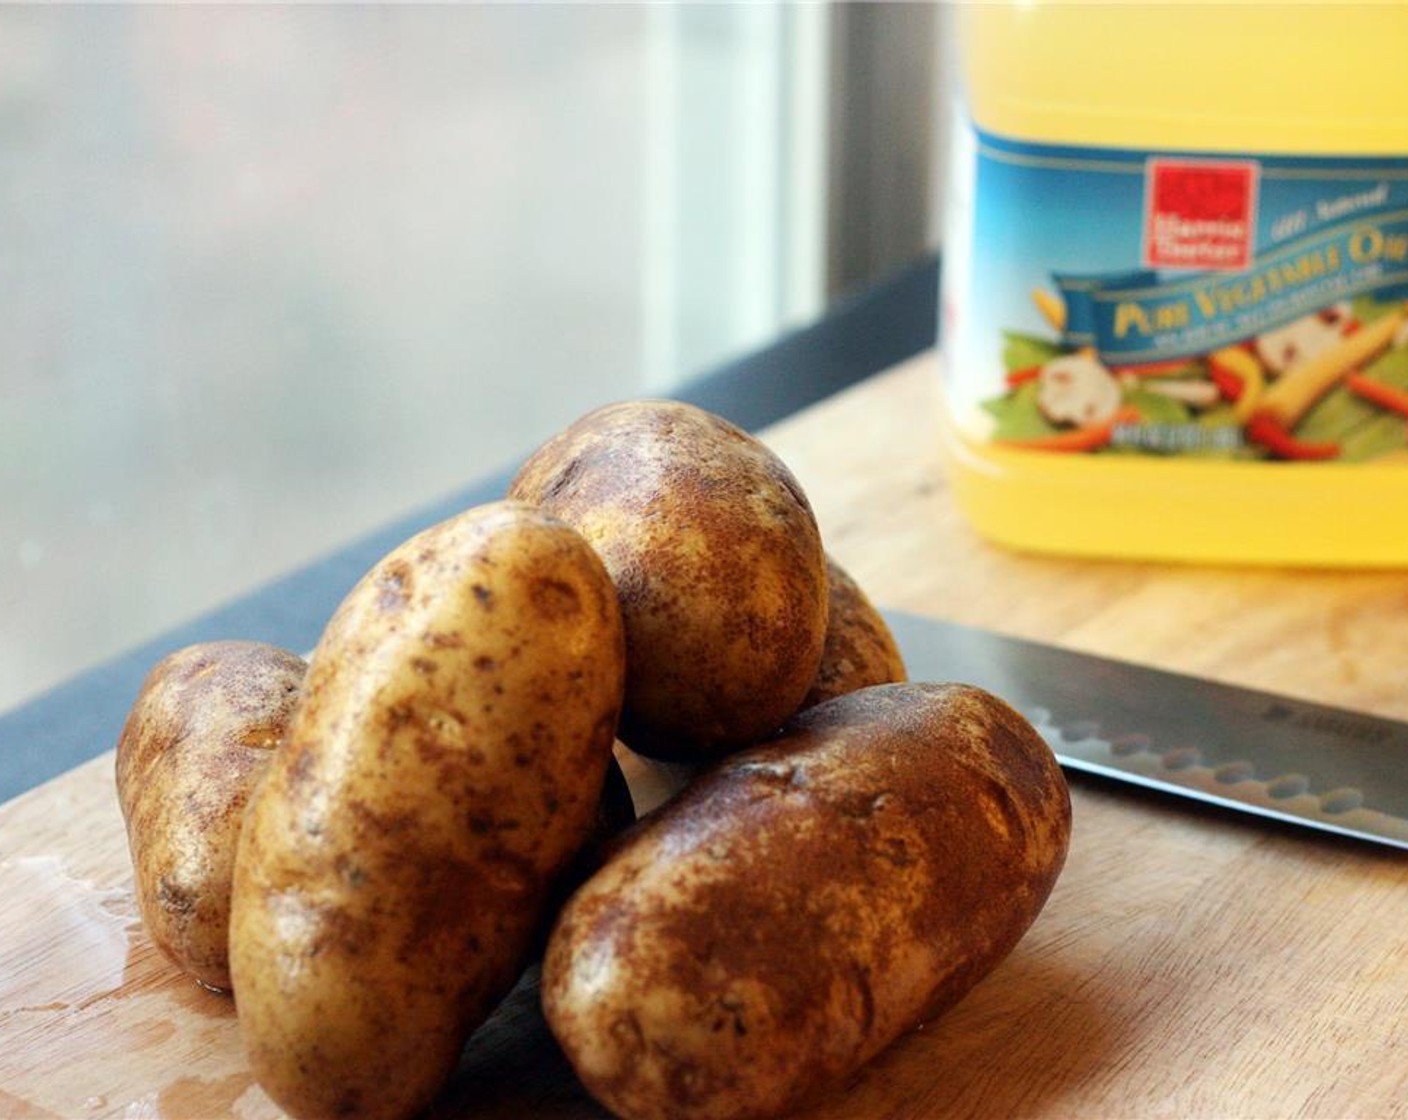 step 1 Vigorously scrub Russet Potatoes (2 lb) to remove any dirt particles and remove any eyes with a knife. Pat dry.